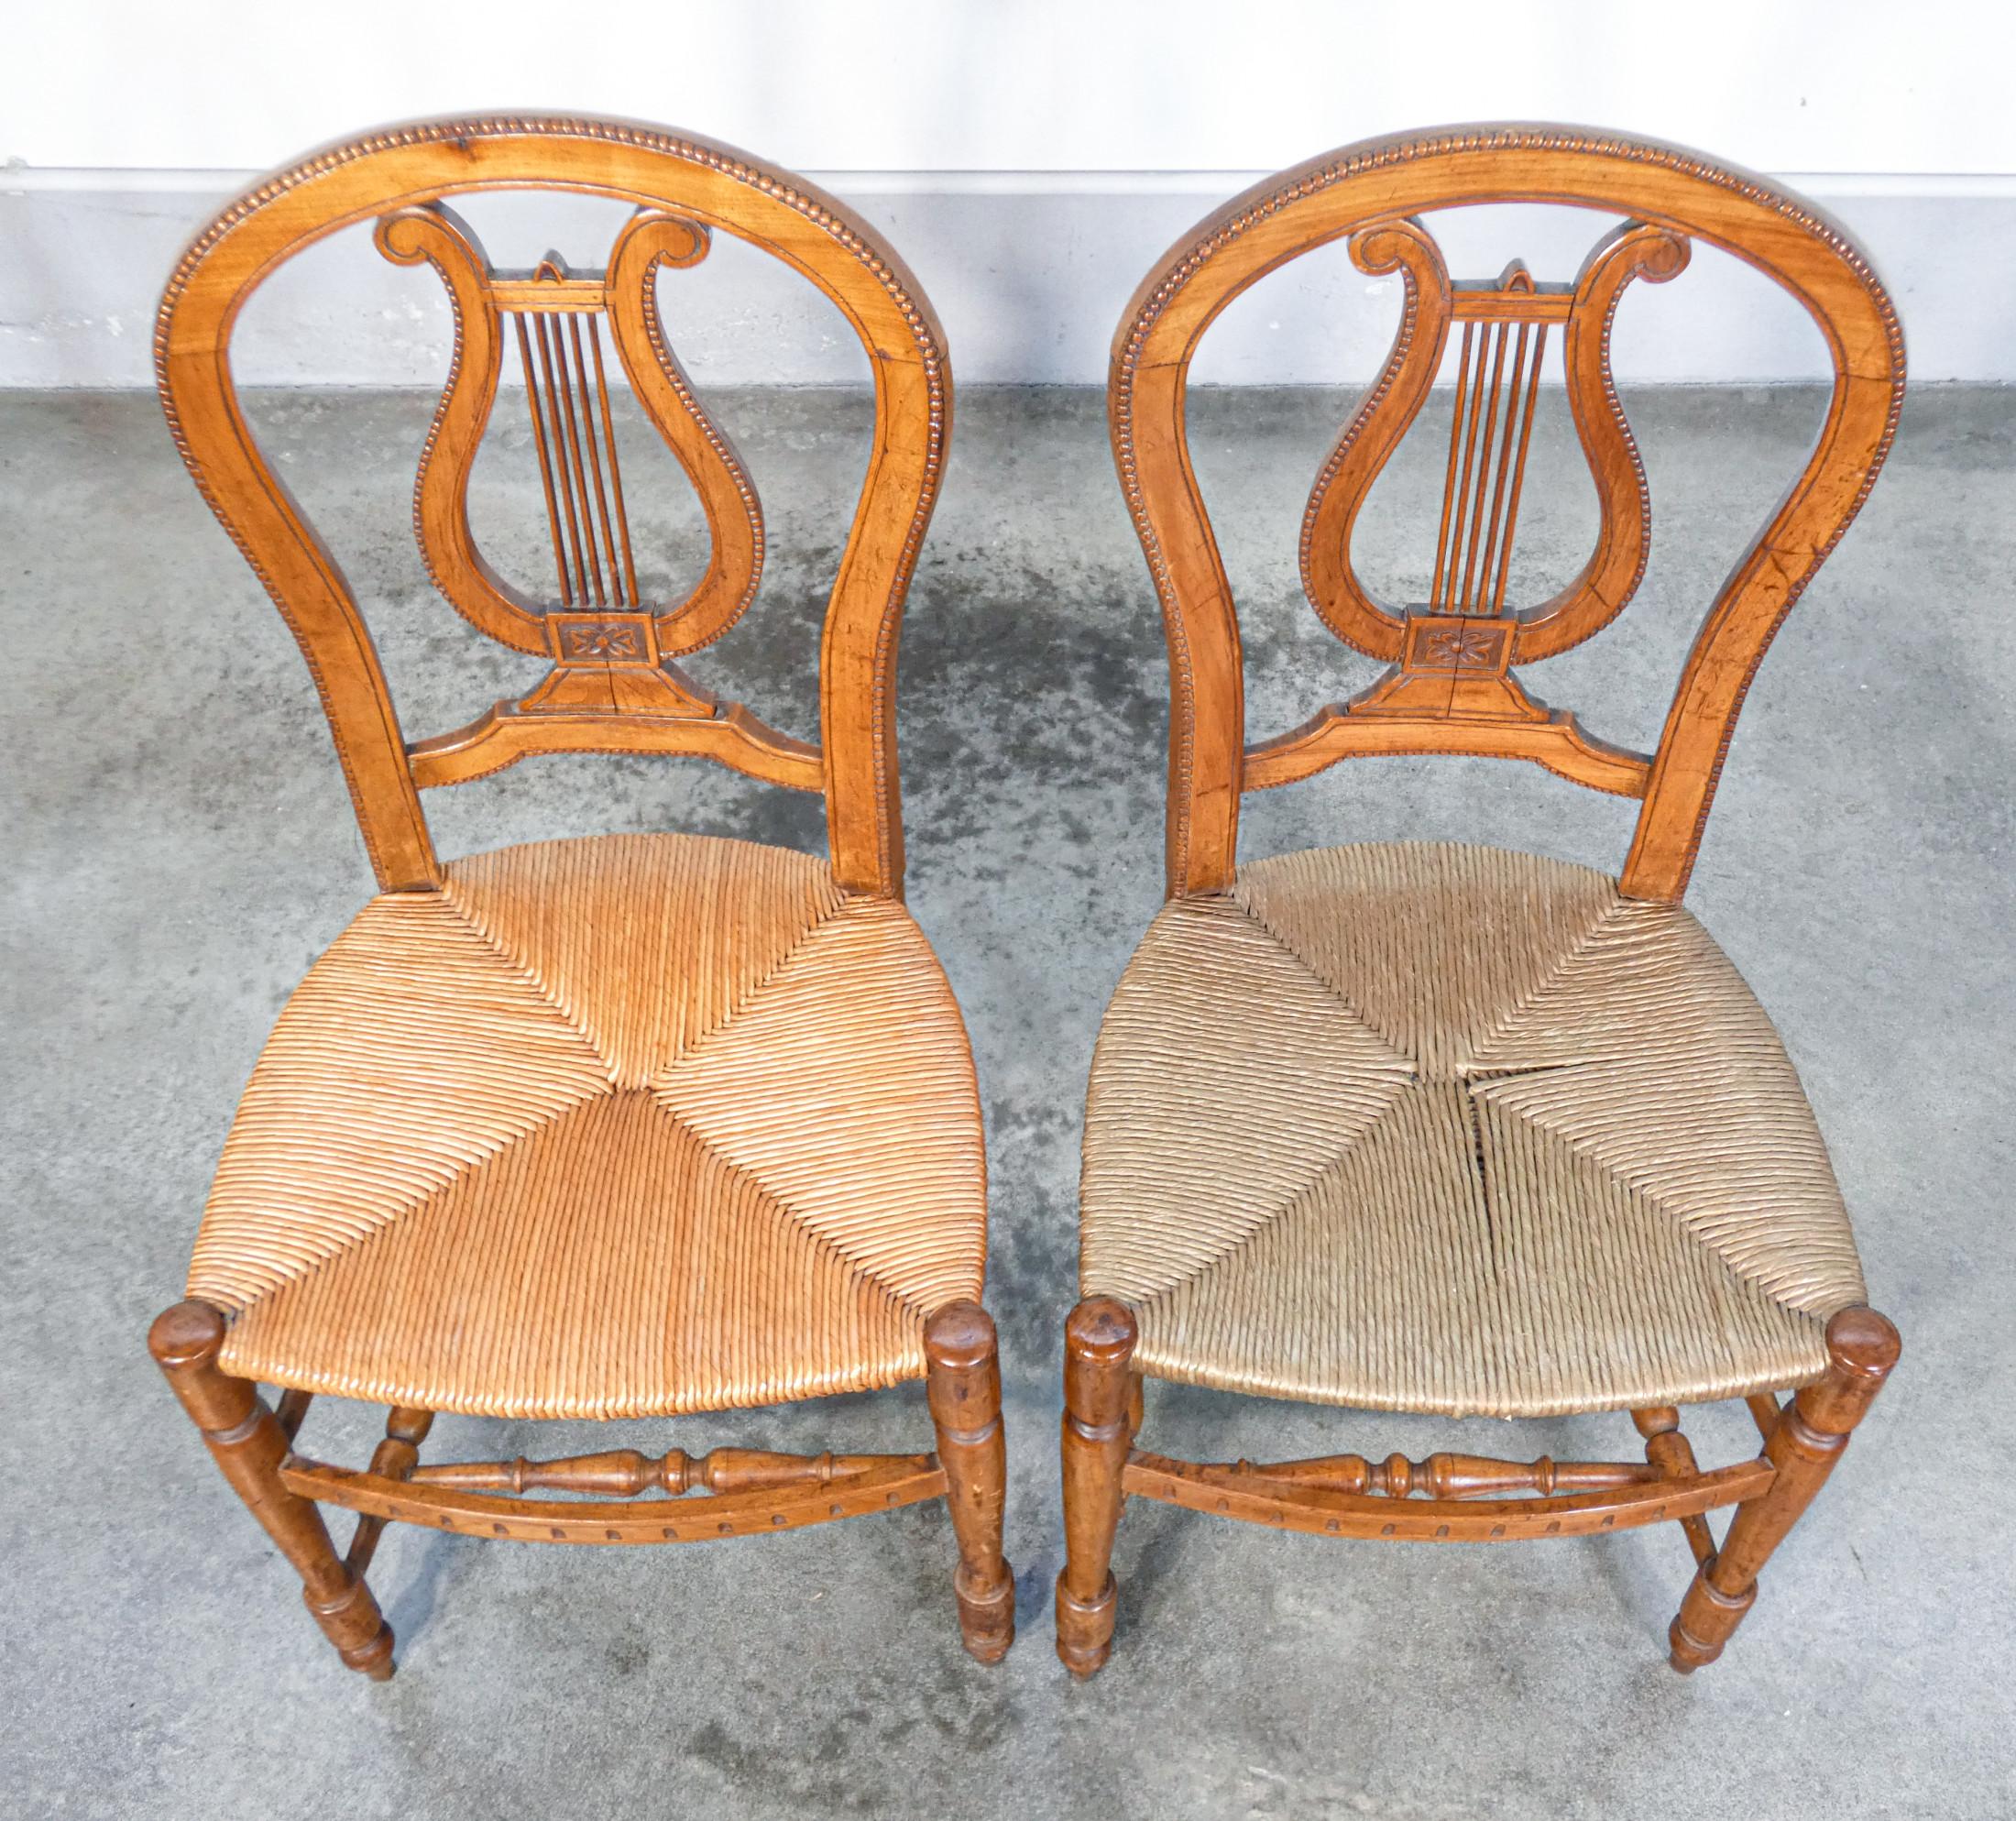 Pair of Cherry Wood Chairs with Lyre-Shaped Back and Straw Seat, Early 20th In Good Condition For Sale In Torino, IT